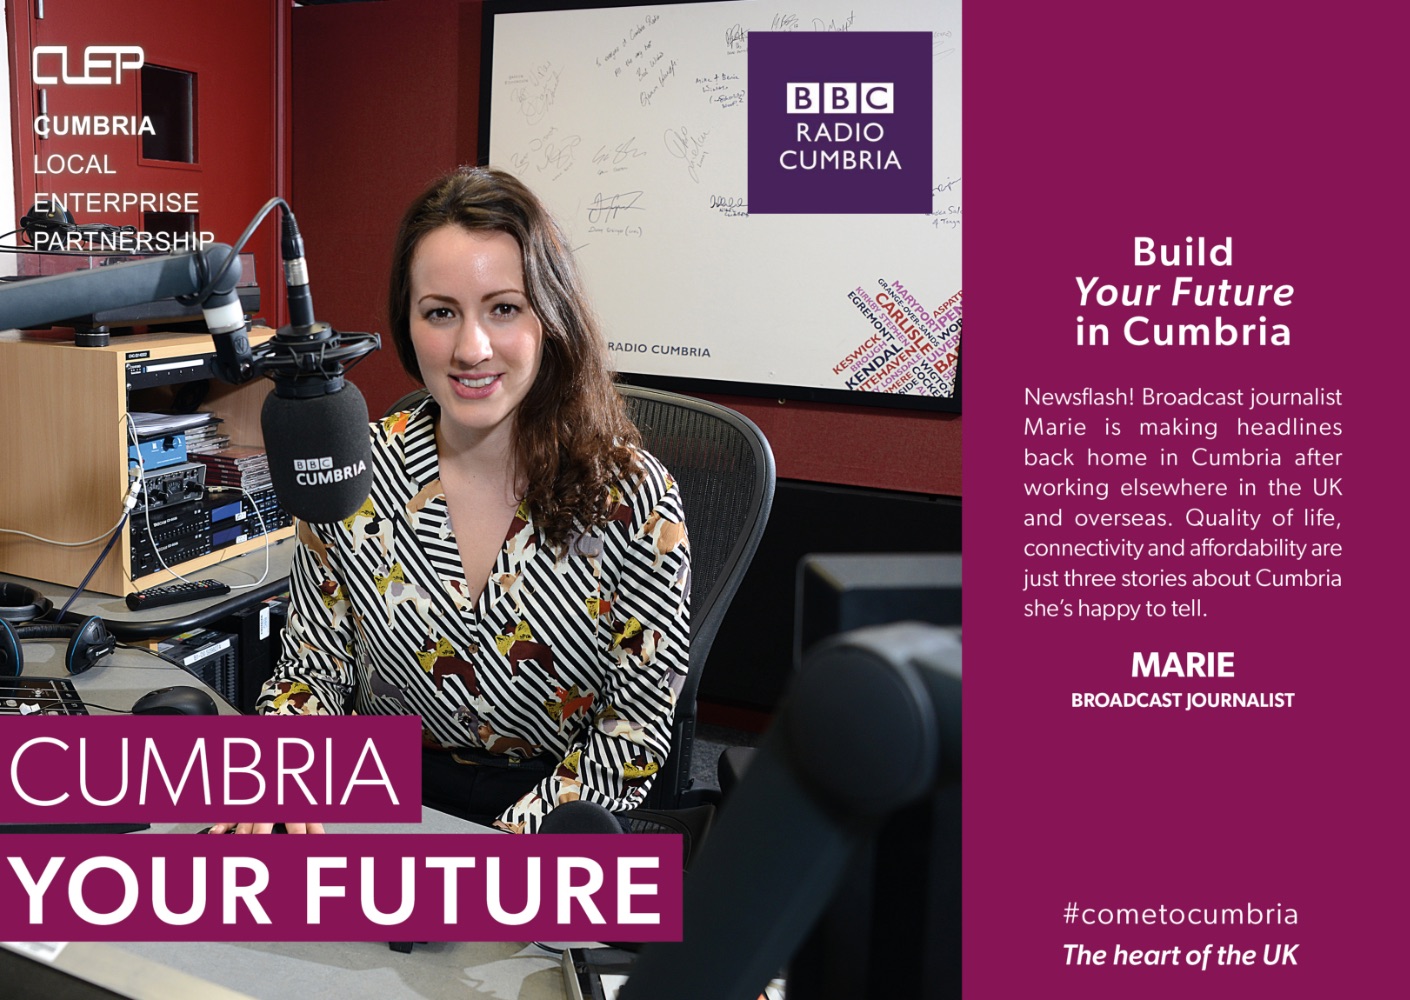 Build Your Future In Cumbria: Newsflash! Broadcast journalist Marie is making headlines back home in Cumbria after working elsewhere in the UK and overseas. Quality of life, connectivity and affordability are just three stories about Cumbria she's happy to tell. (Photo: Marie, broadcast journalist).